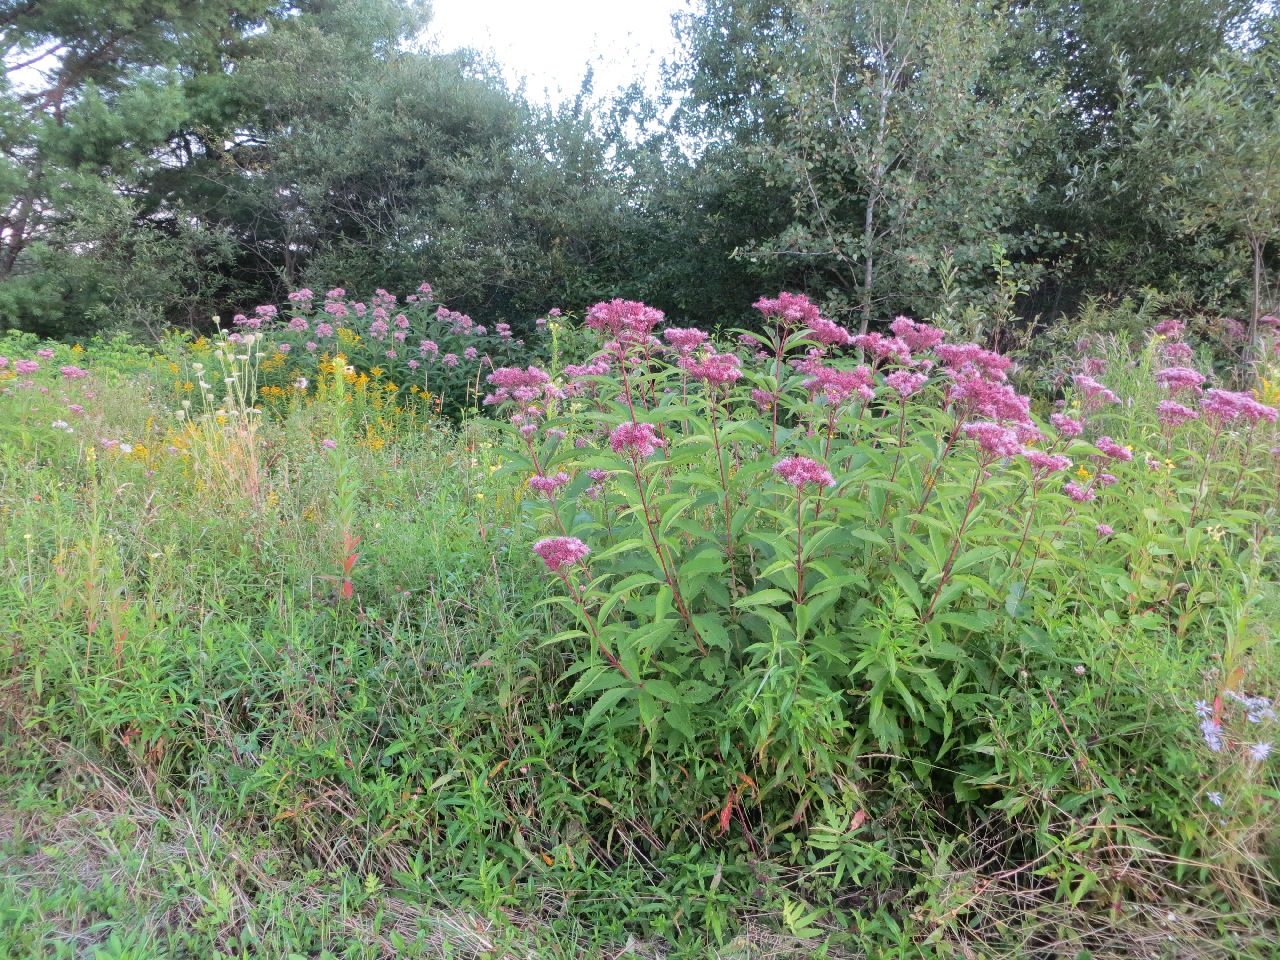 A 6-foot-tall stand of grass, goldenrod, queen Anne's lace, some purplish flowers I can't think of the name of right now, in front of a stand of brushy trees, including a white pine on the left and a baby beech (I think) in the middle.